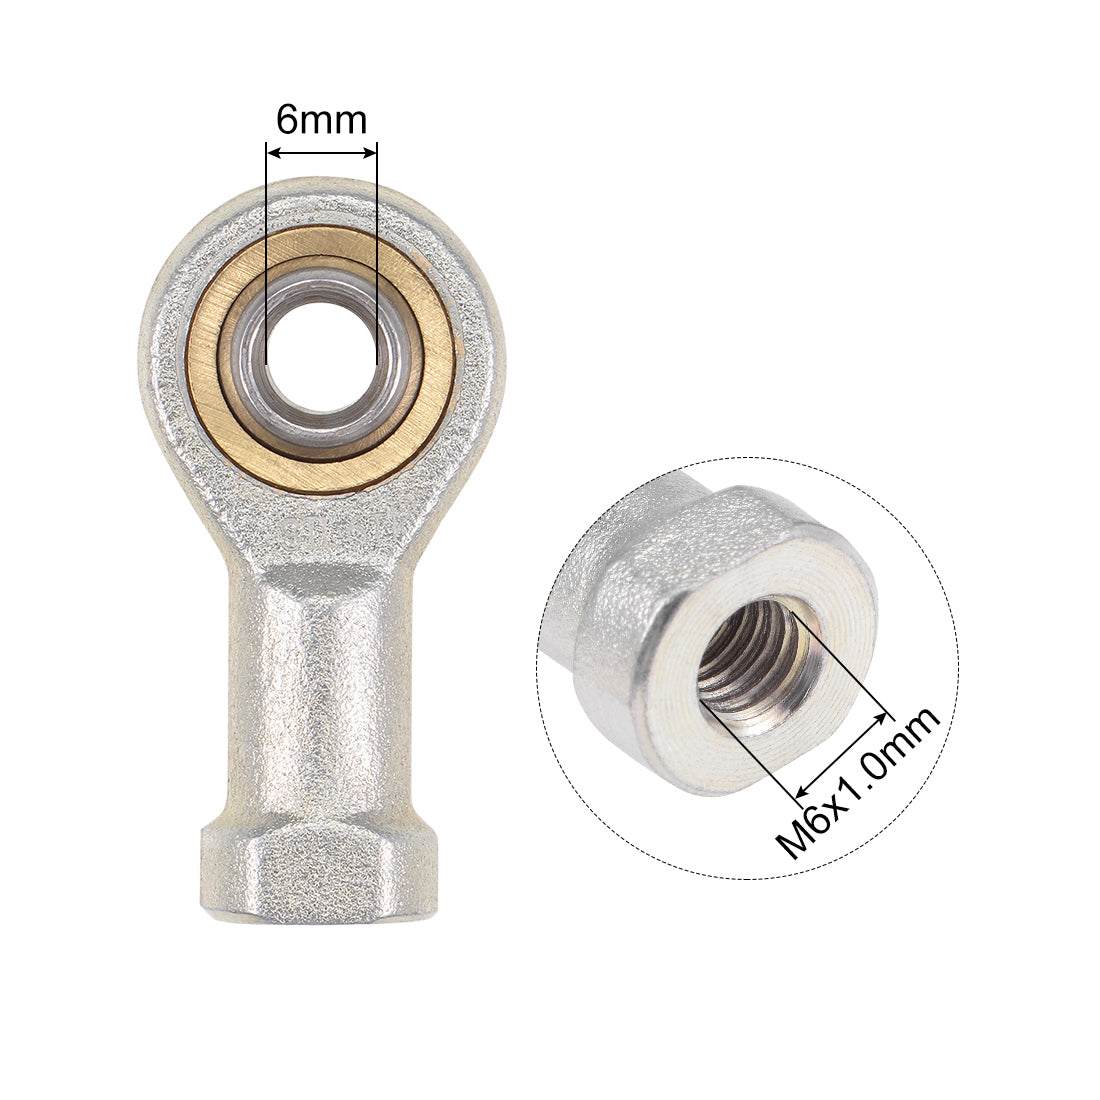 uxcell Uxcell 6mm Rod End Bearing M6x1.0mm Rod Ends Ball Joint Female Right Hand Thread